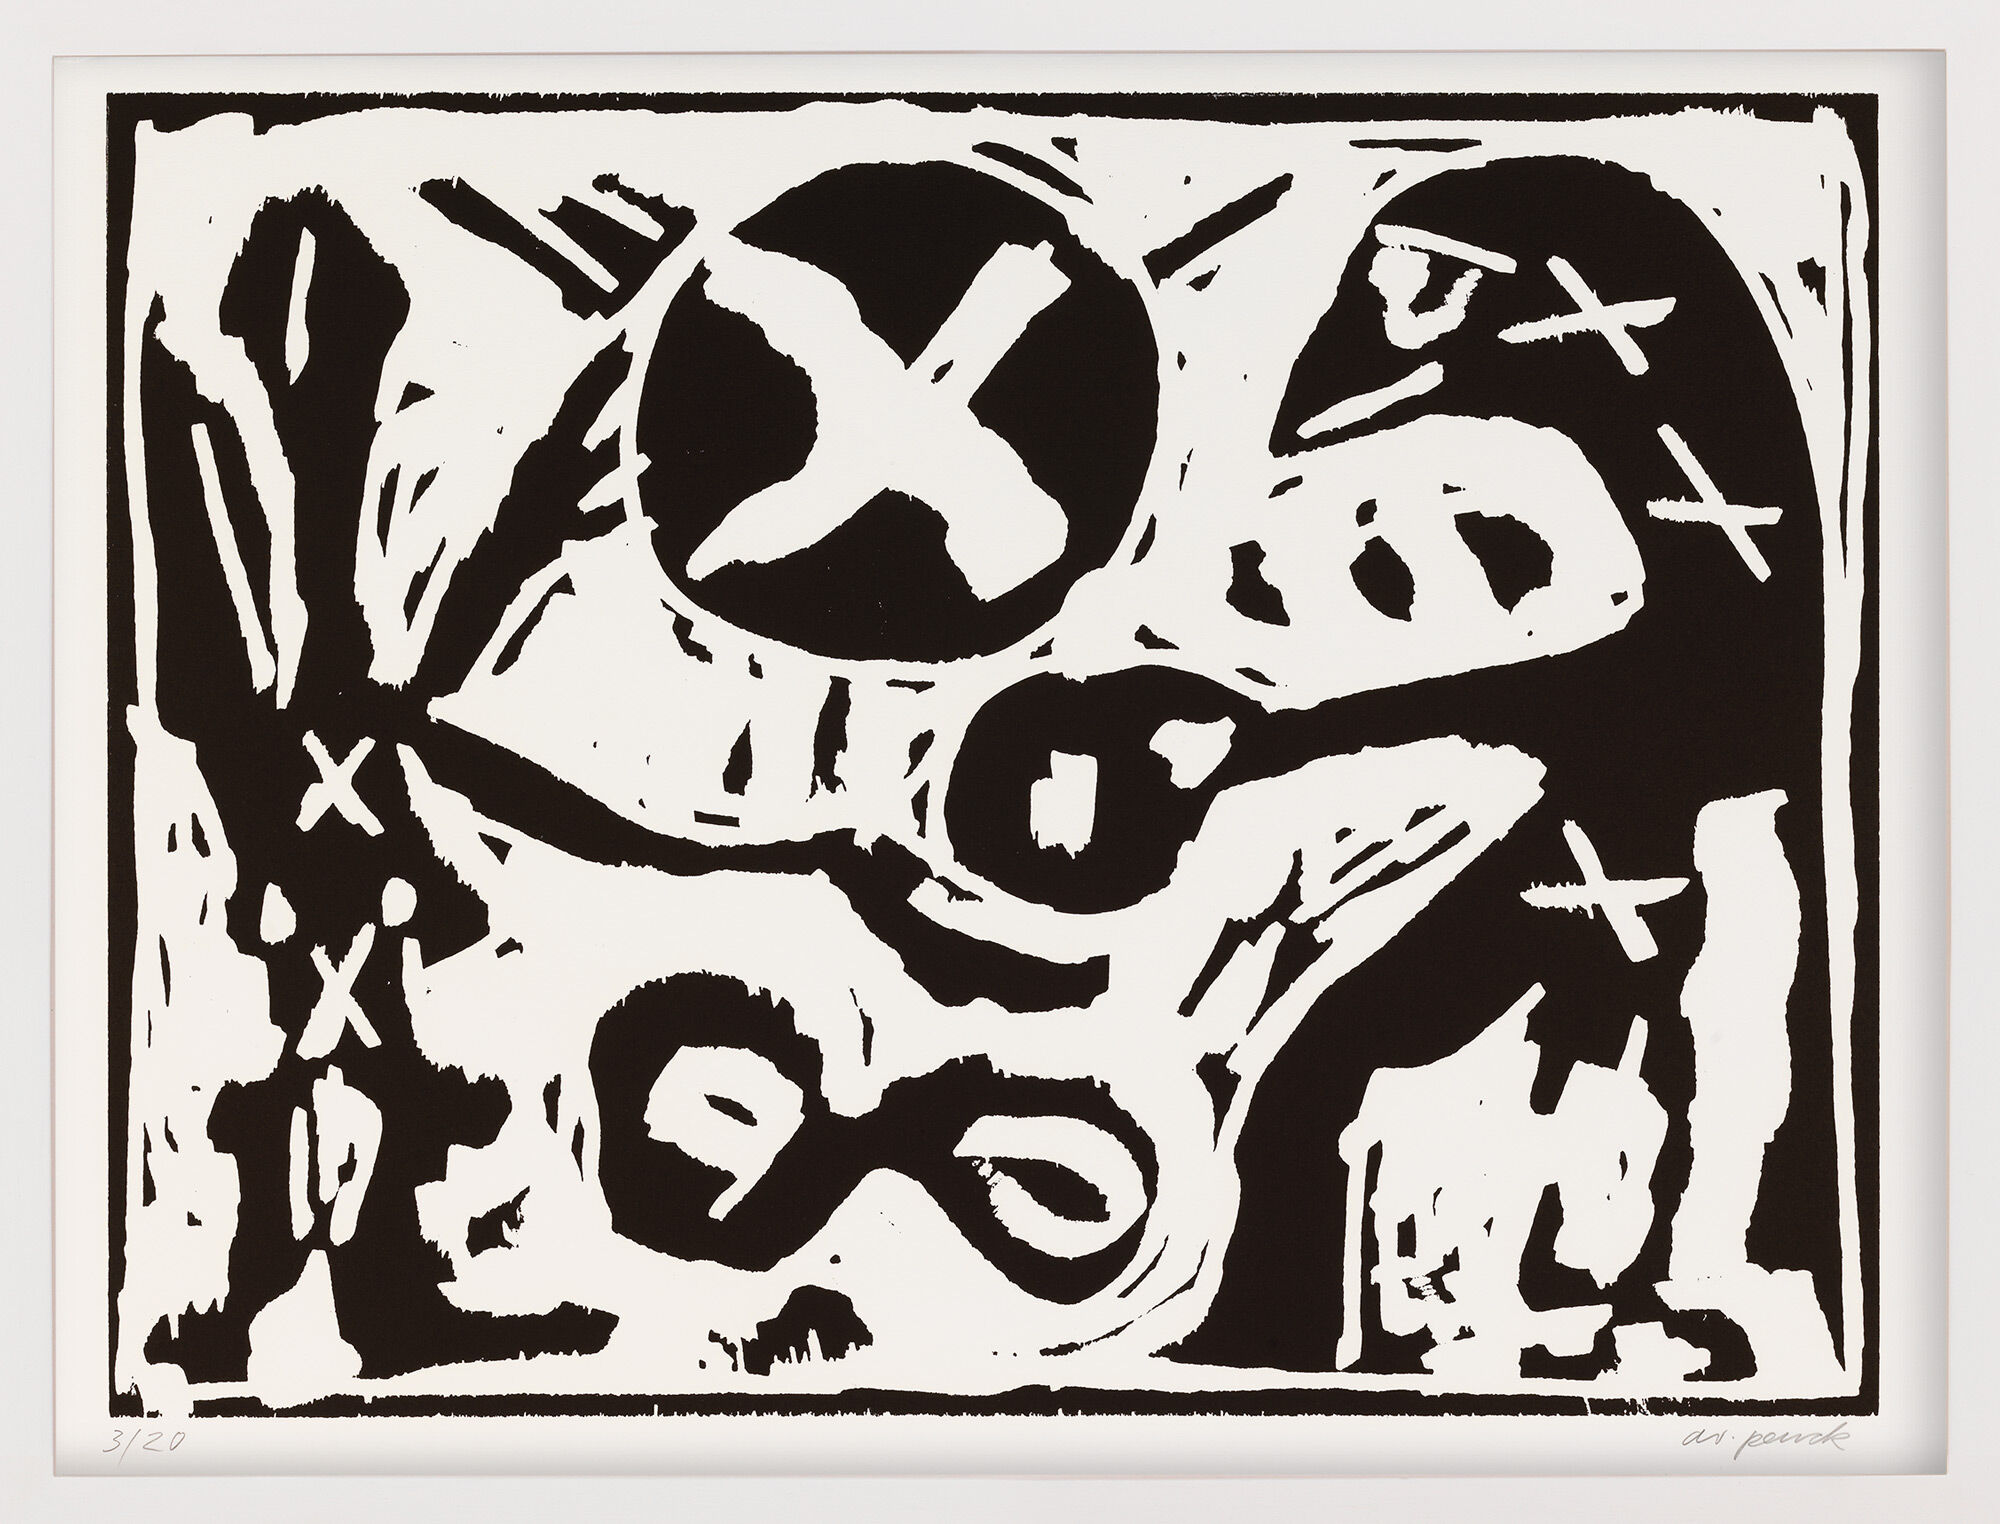 Picture "Give Me (There You Have It)" (1991) by A. R. Penck